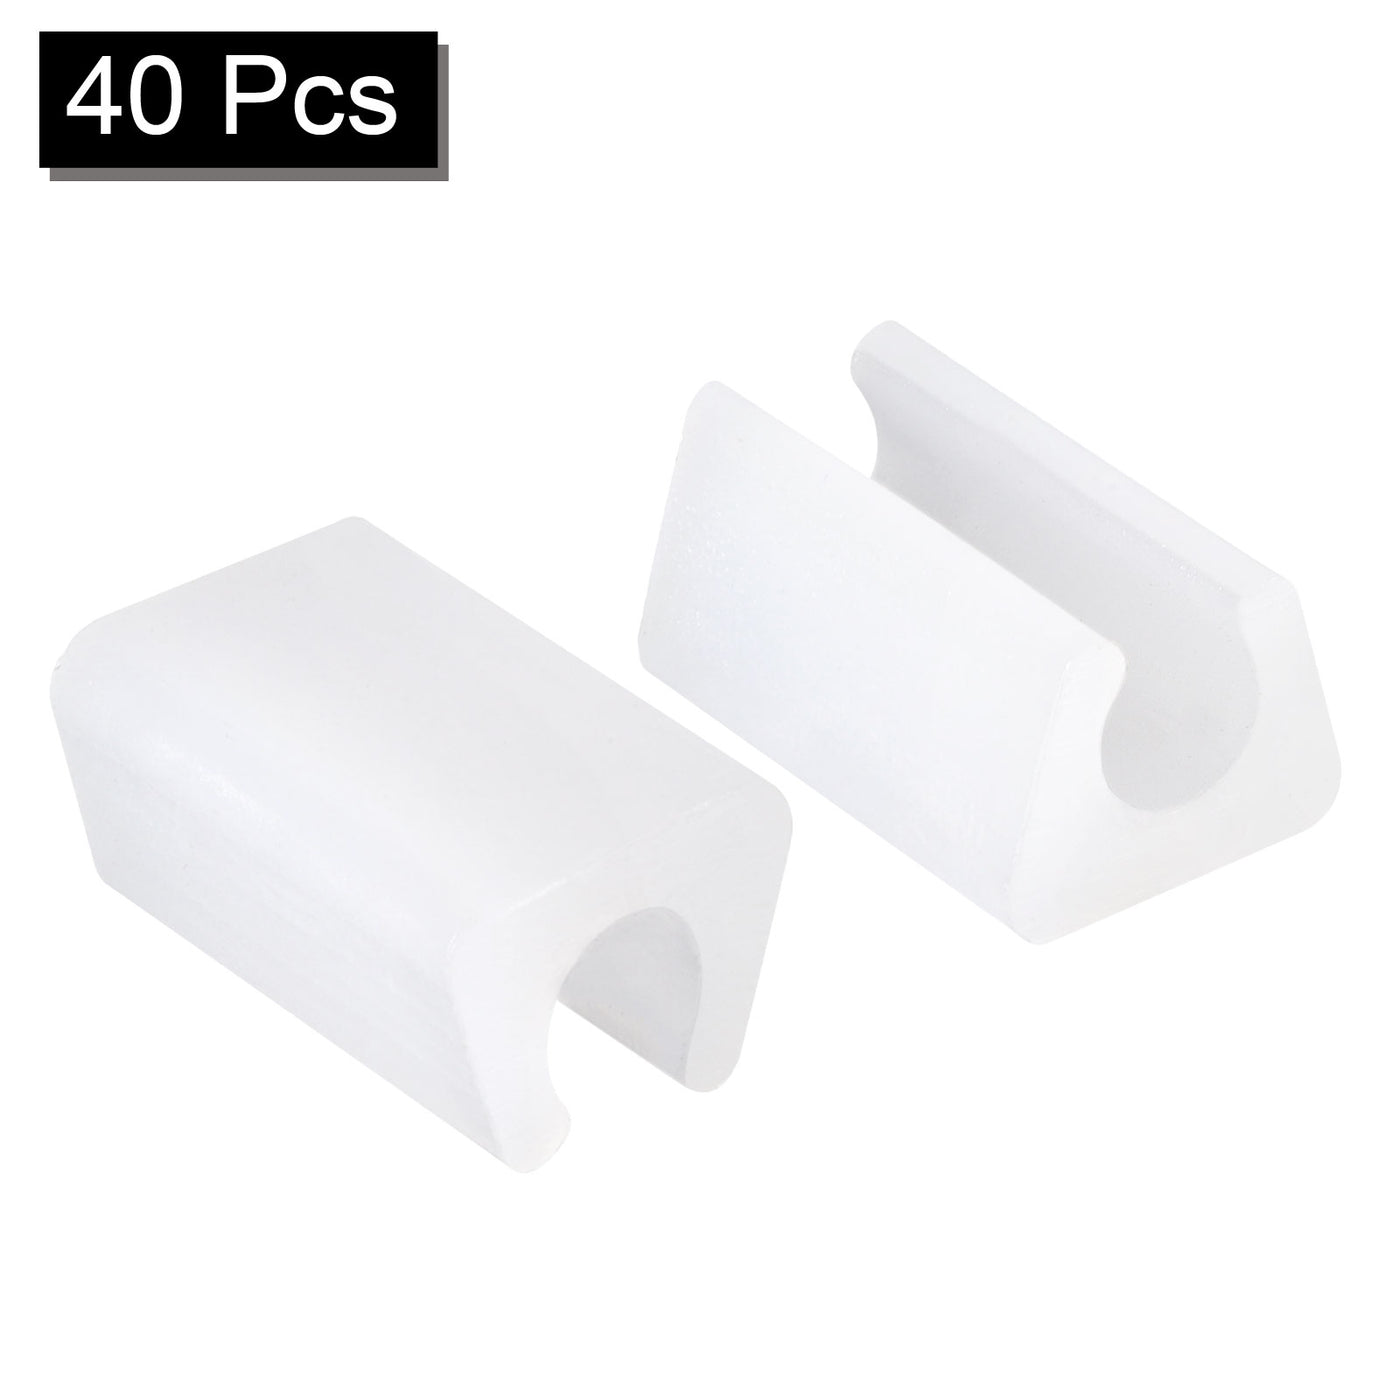 uxcell Uxcell 40Pcs Rectangle Shaped Non-Slip Chair Leg Tip 7-8mm Plastic Furniture Feet White